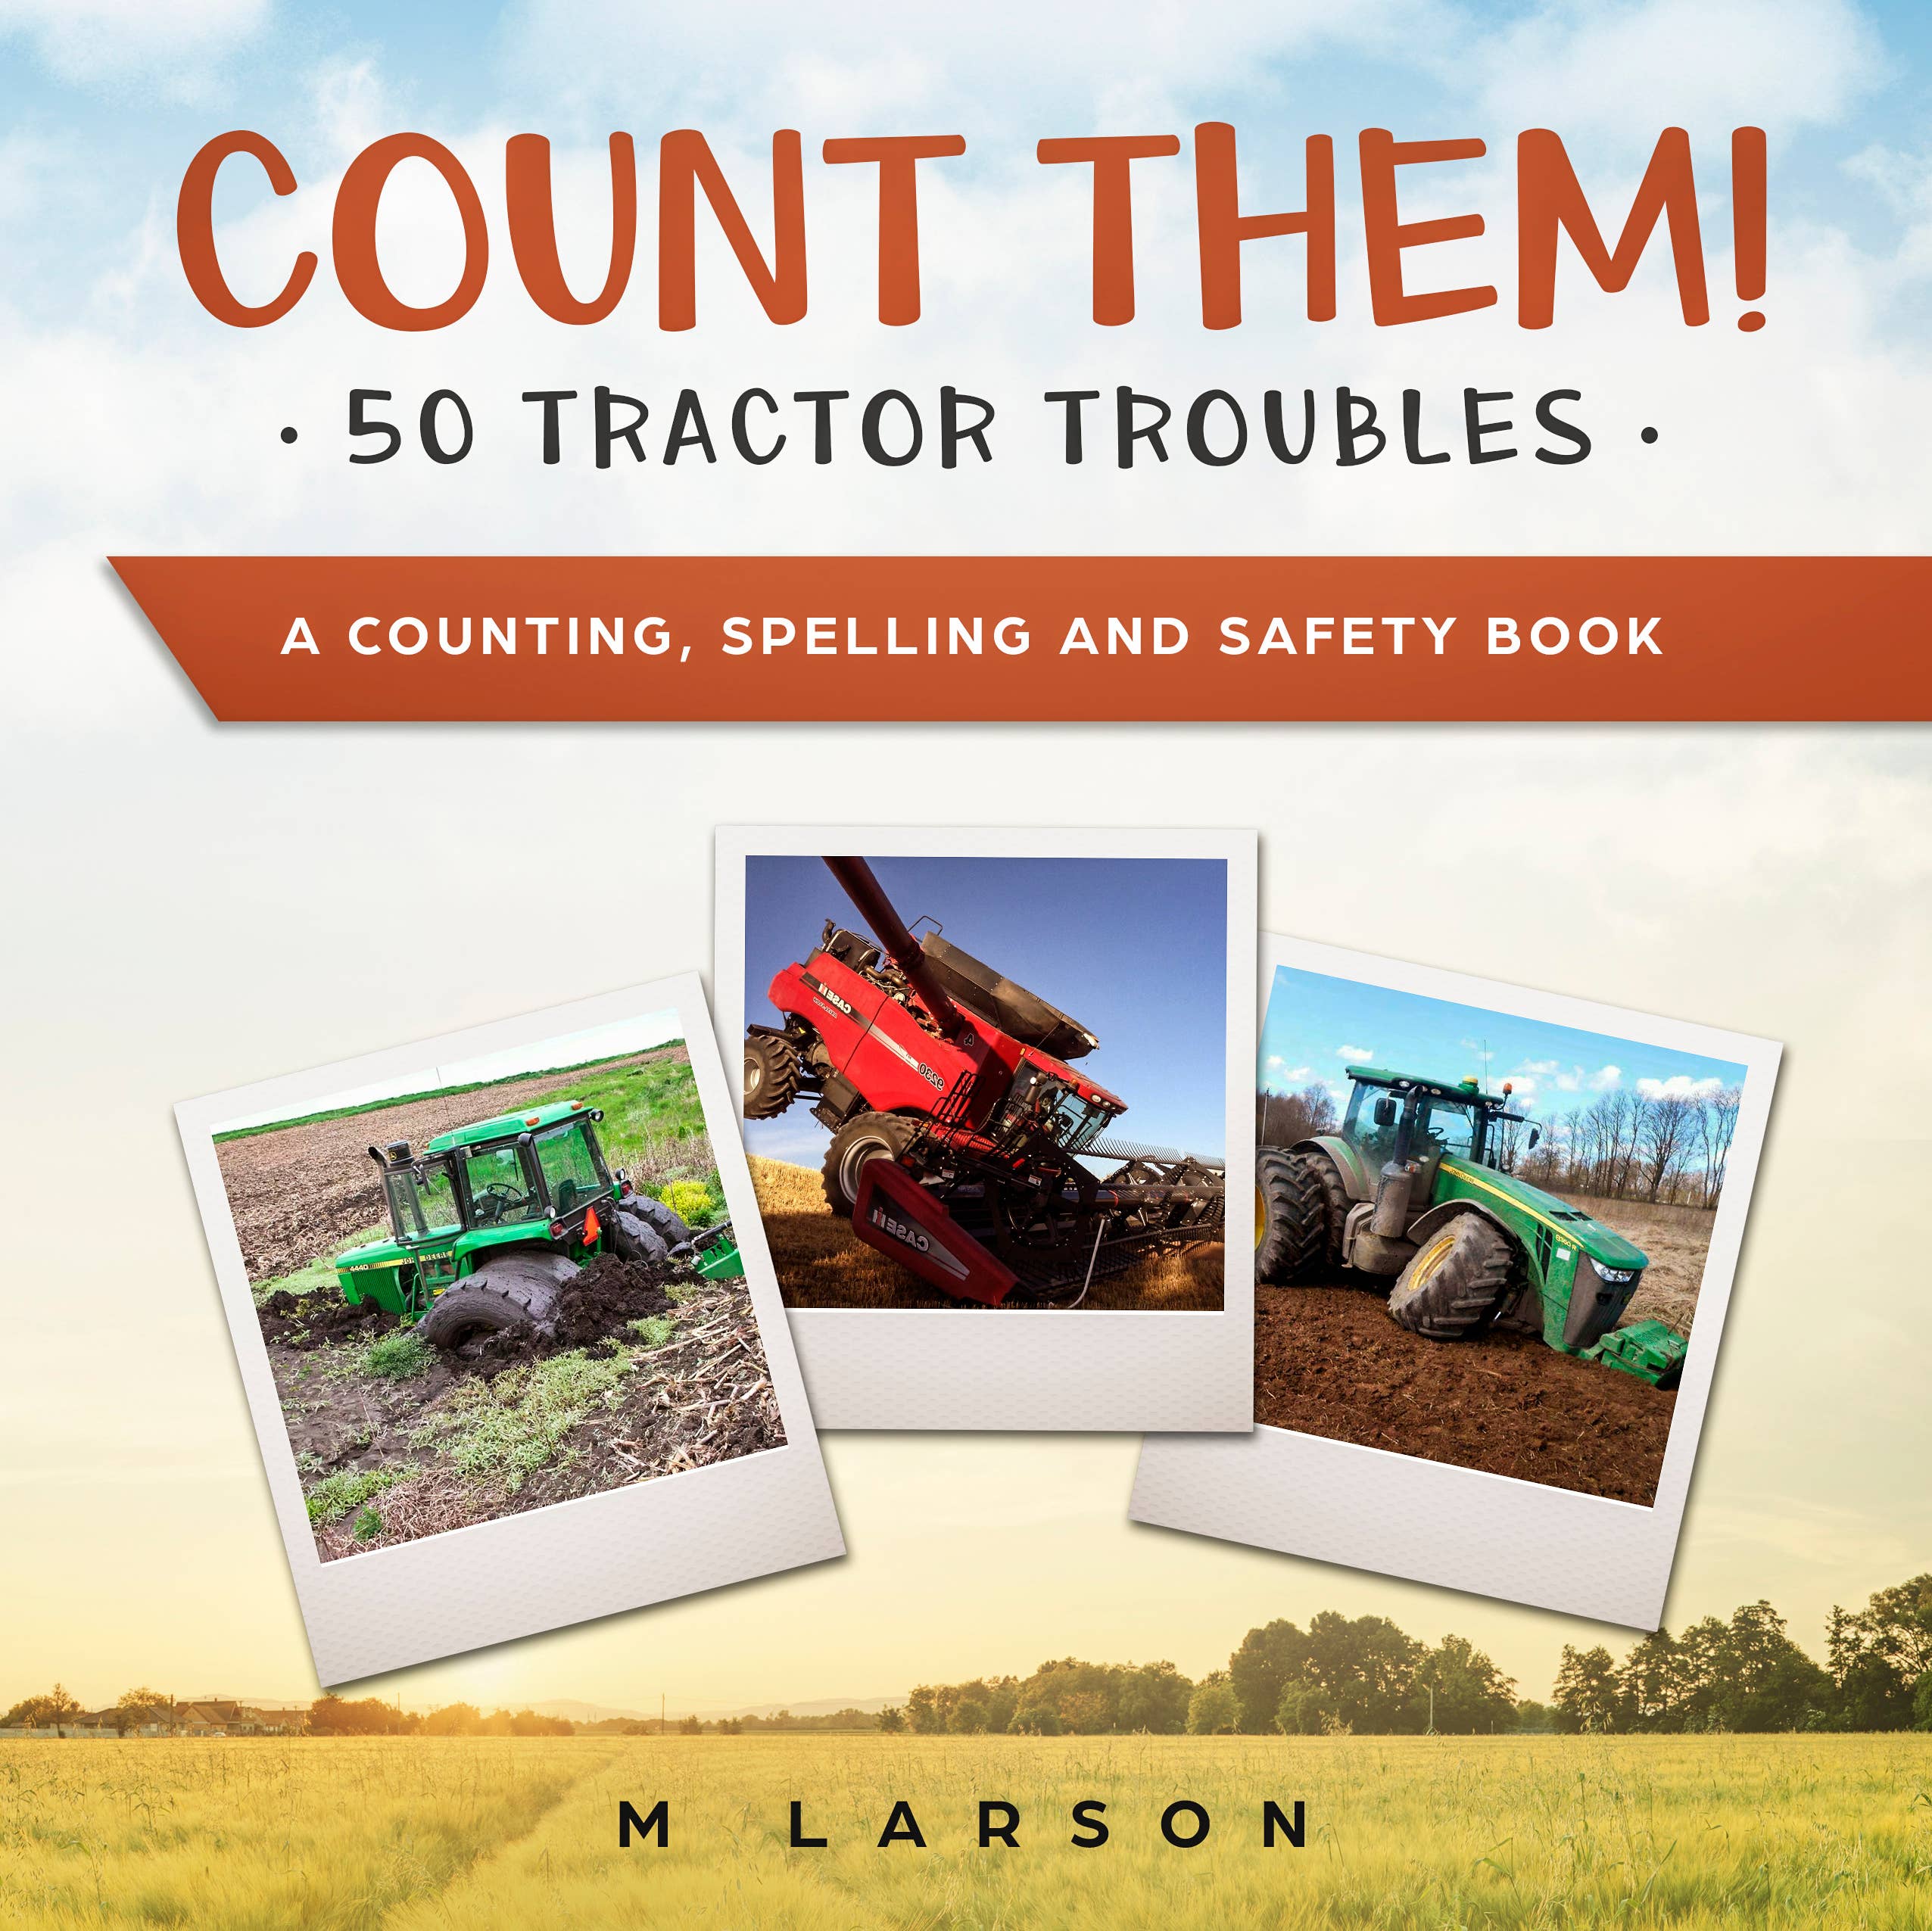 Count Them 50 Tractor Troubles book